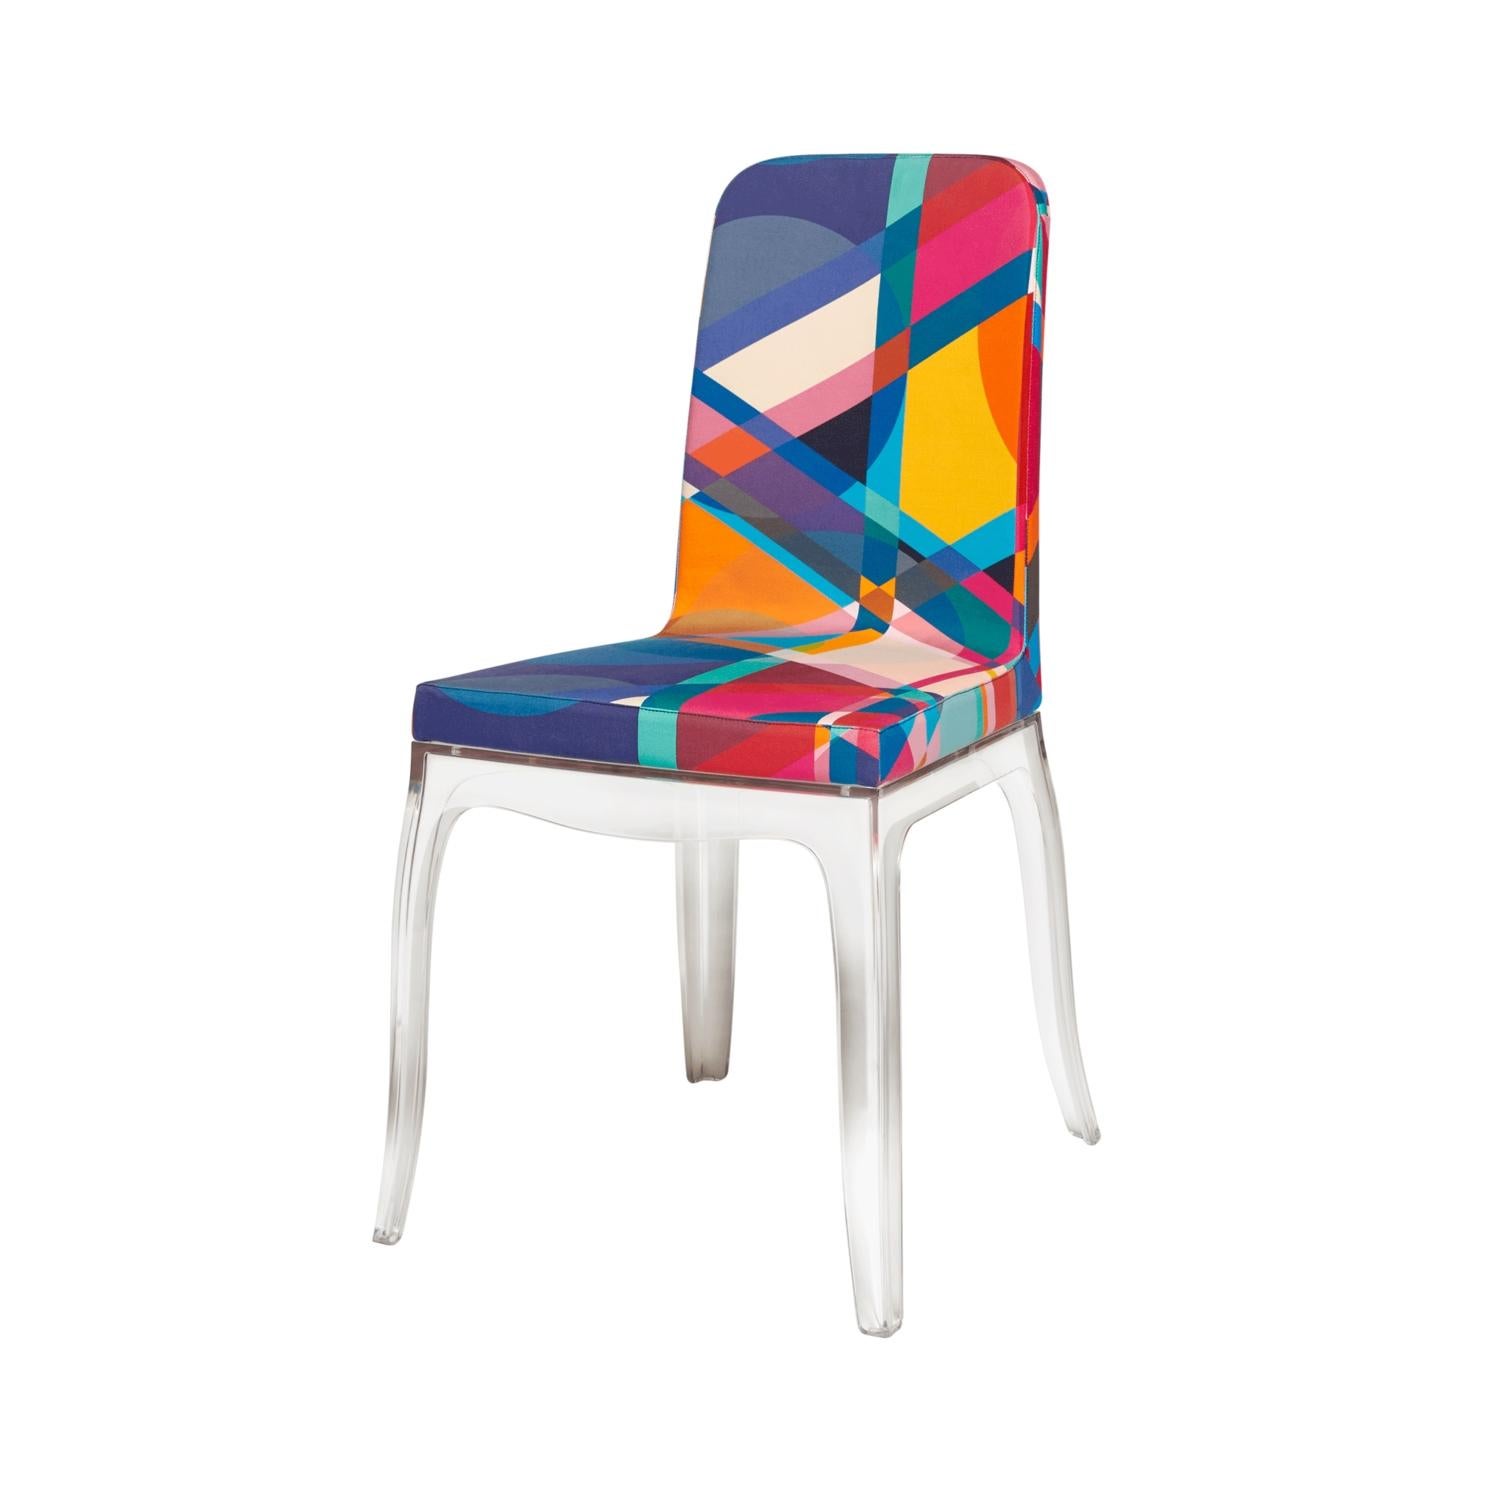 Italian Moibibi Colorful Dining Chair, Designed by Marcel Wanders, Made in Italy